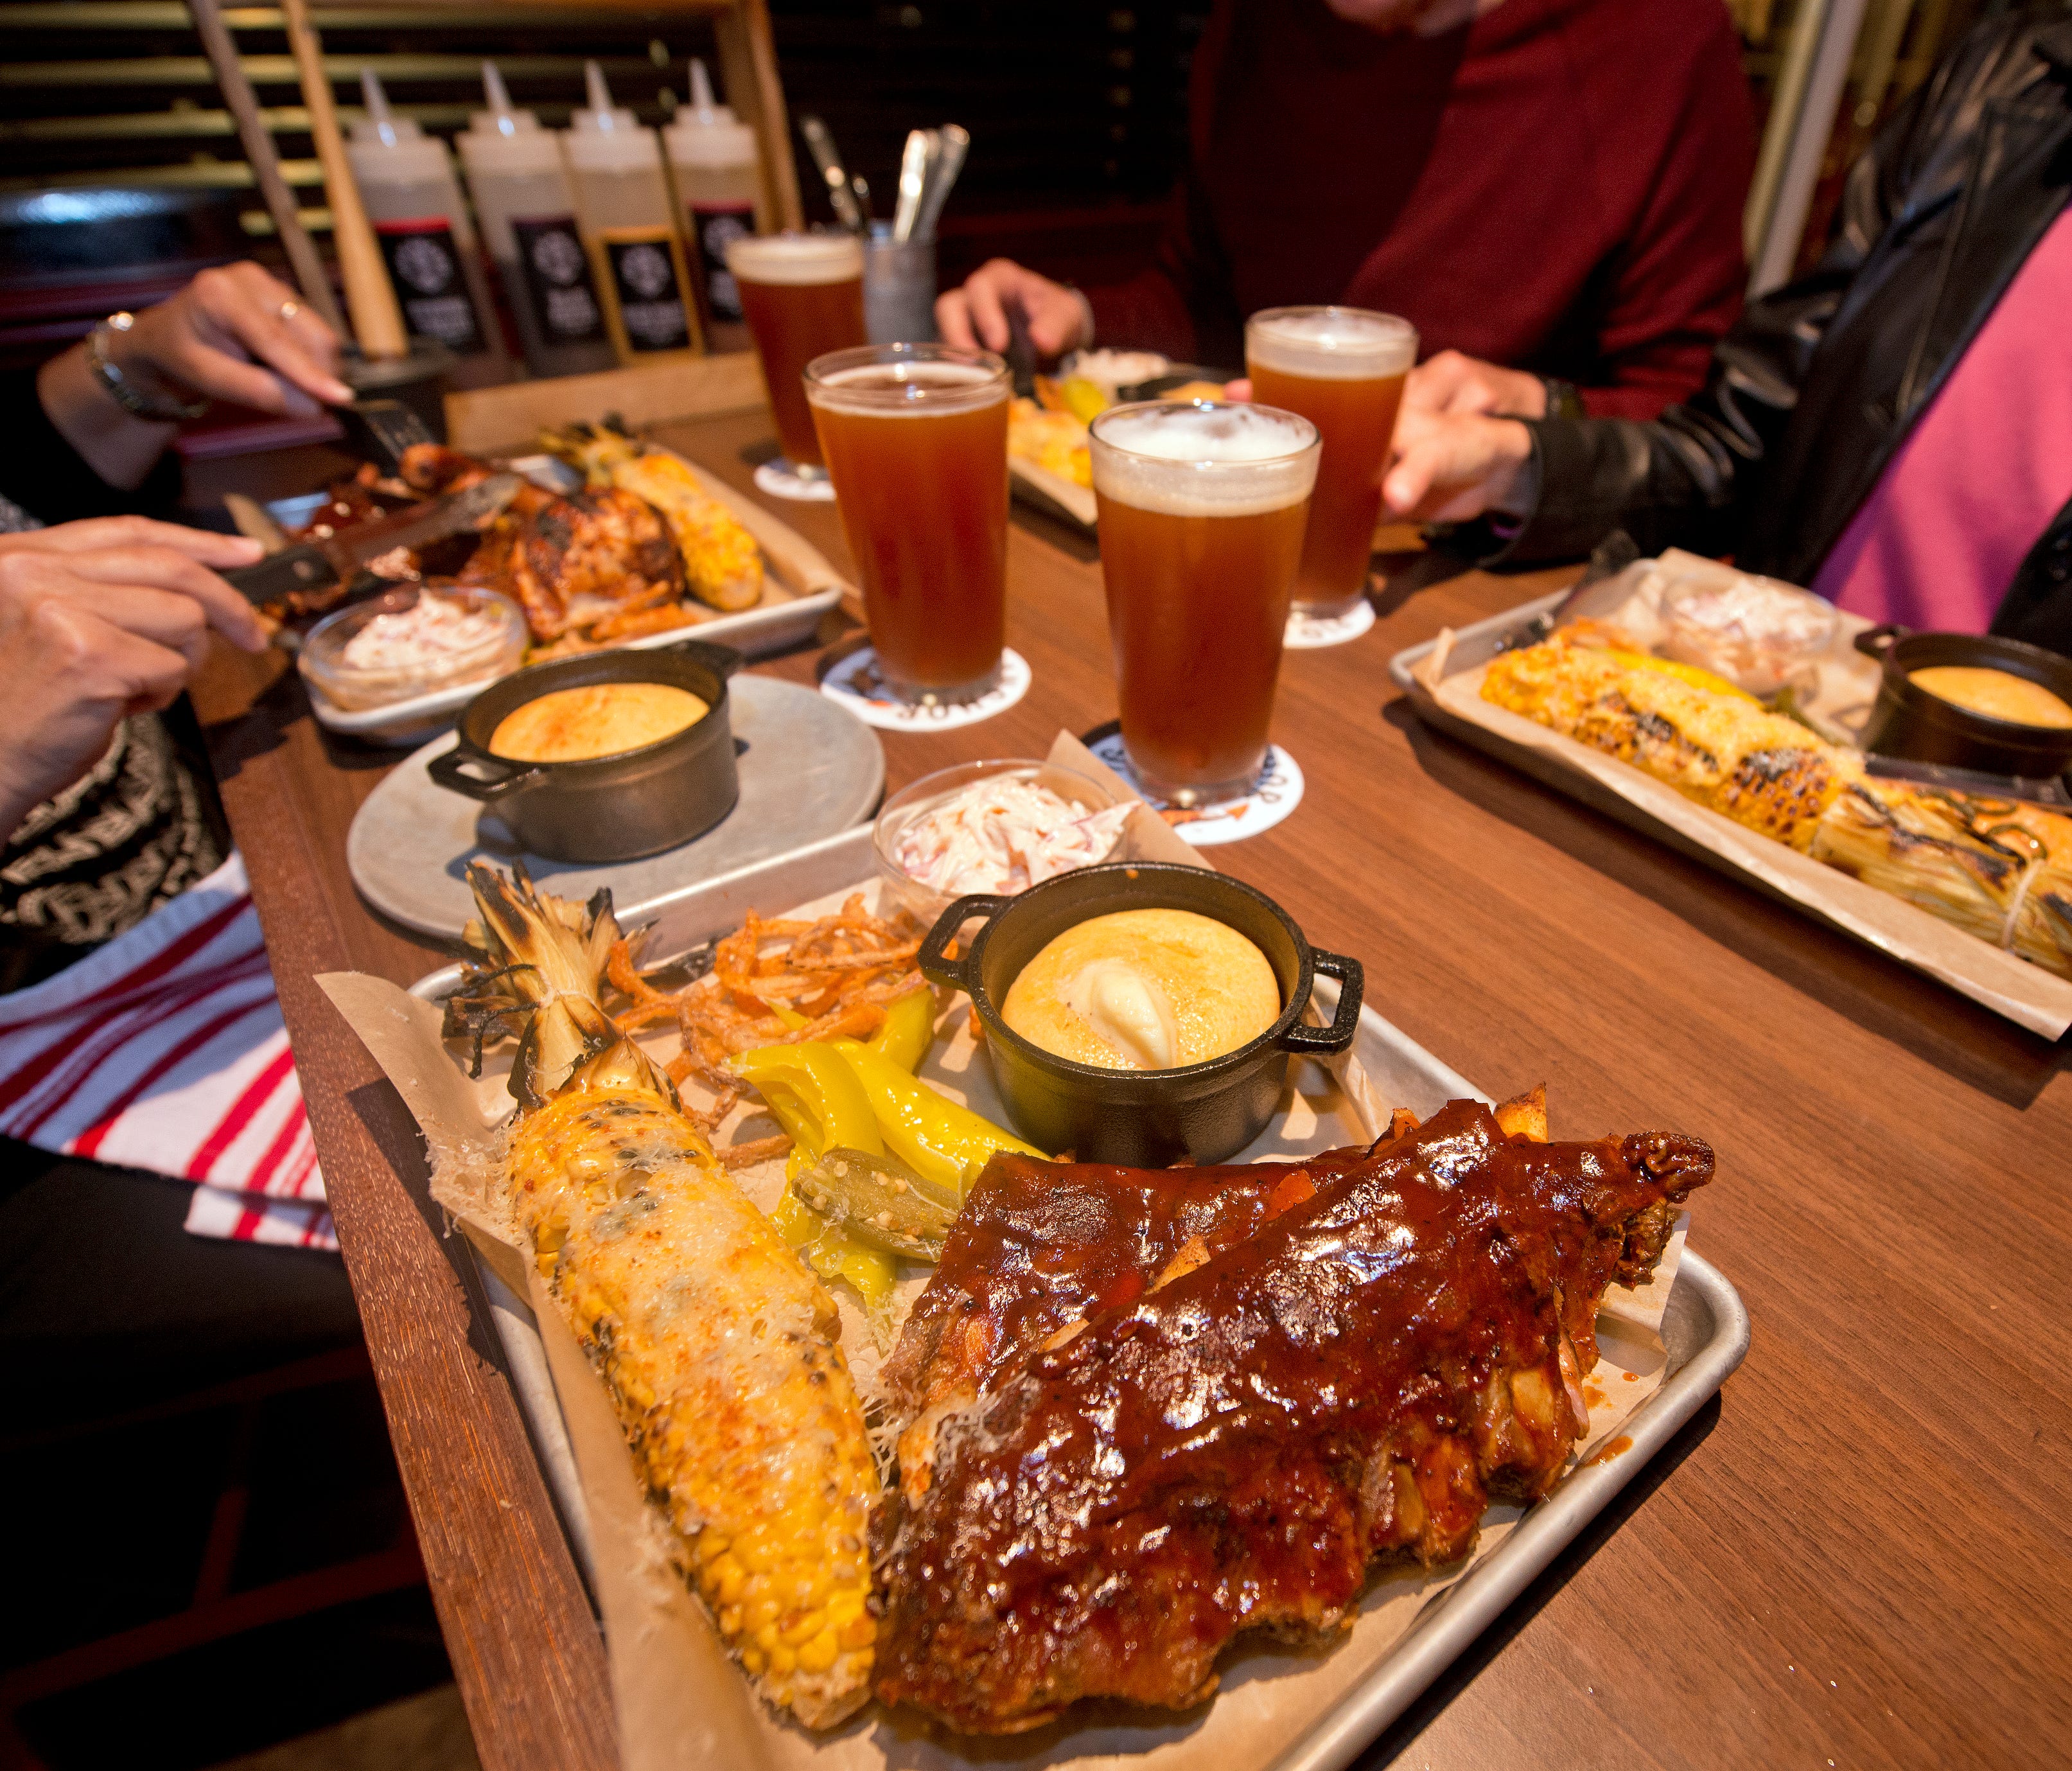 Carnival Cruise Line's new Carnival Horizon boasts a Guy Fieri barcecue eatery and brewhouse called Guy's Pig & Anchor Smokehouse|Brewhouse.